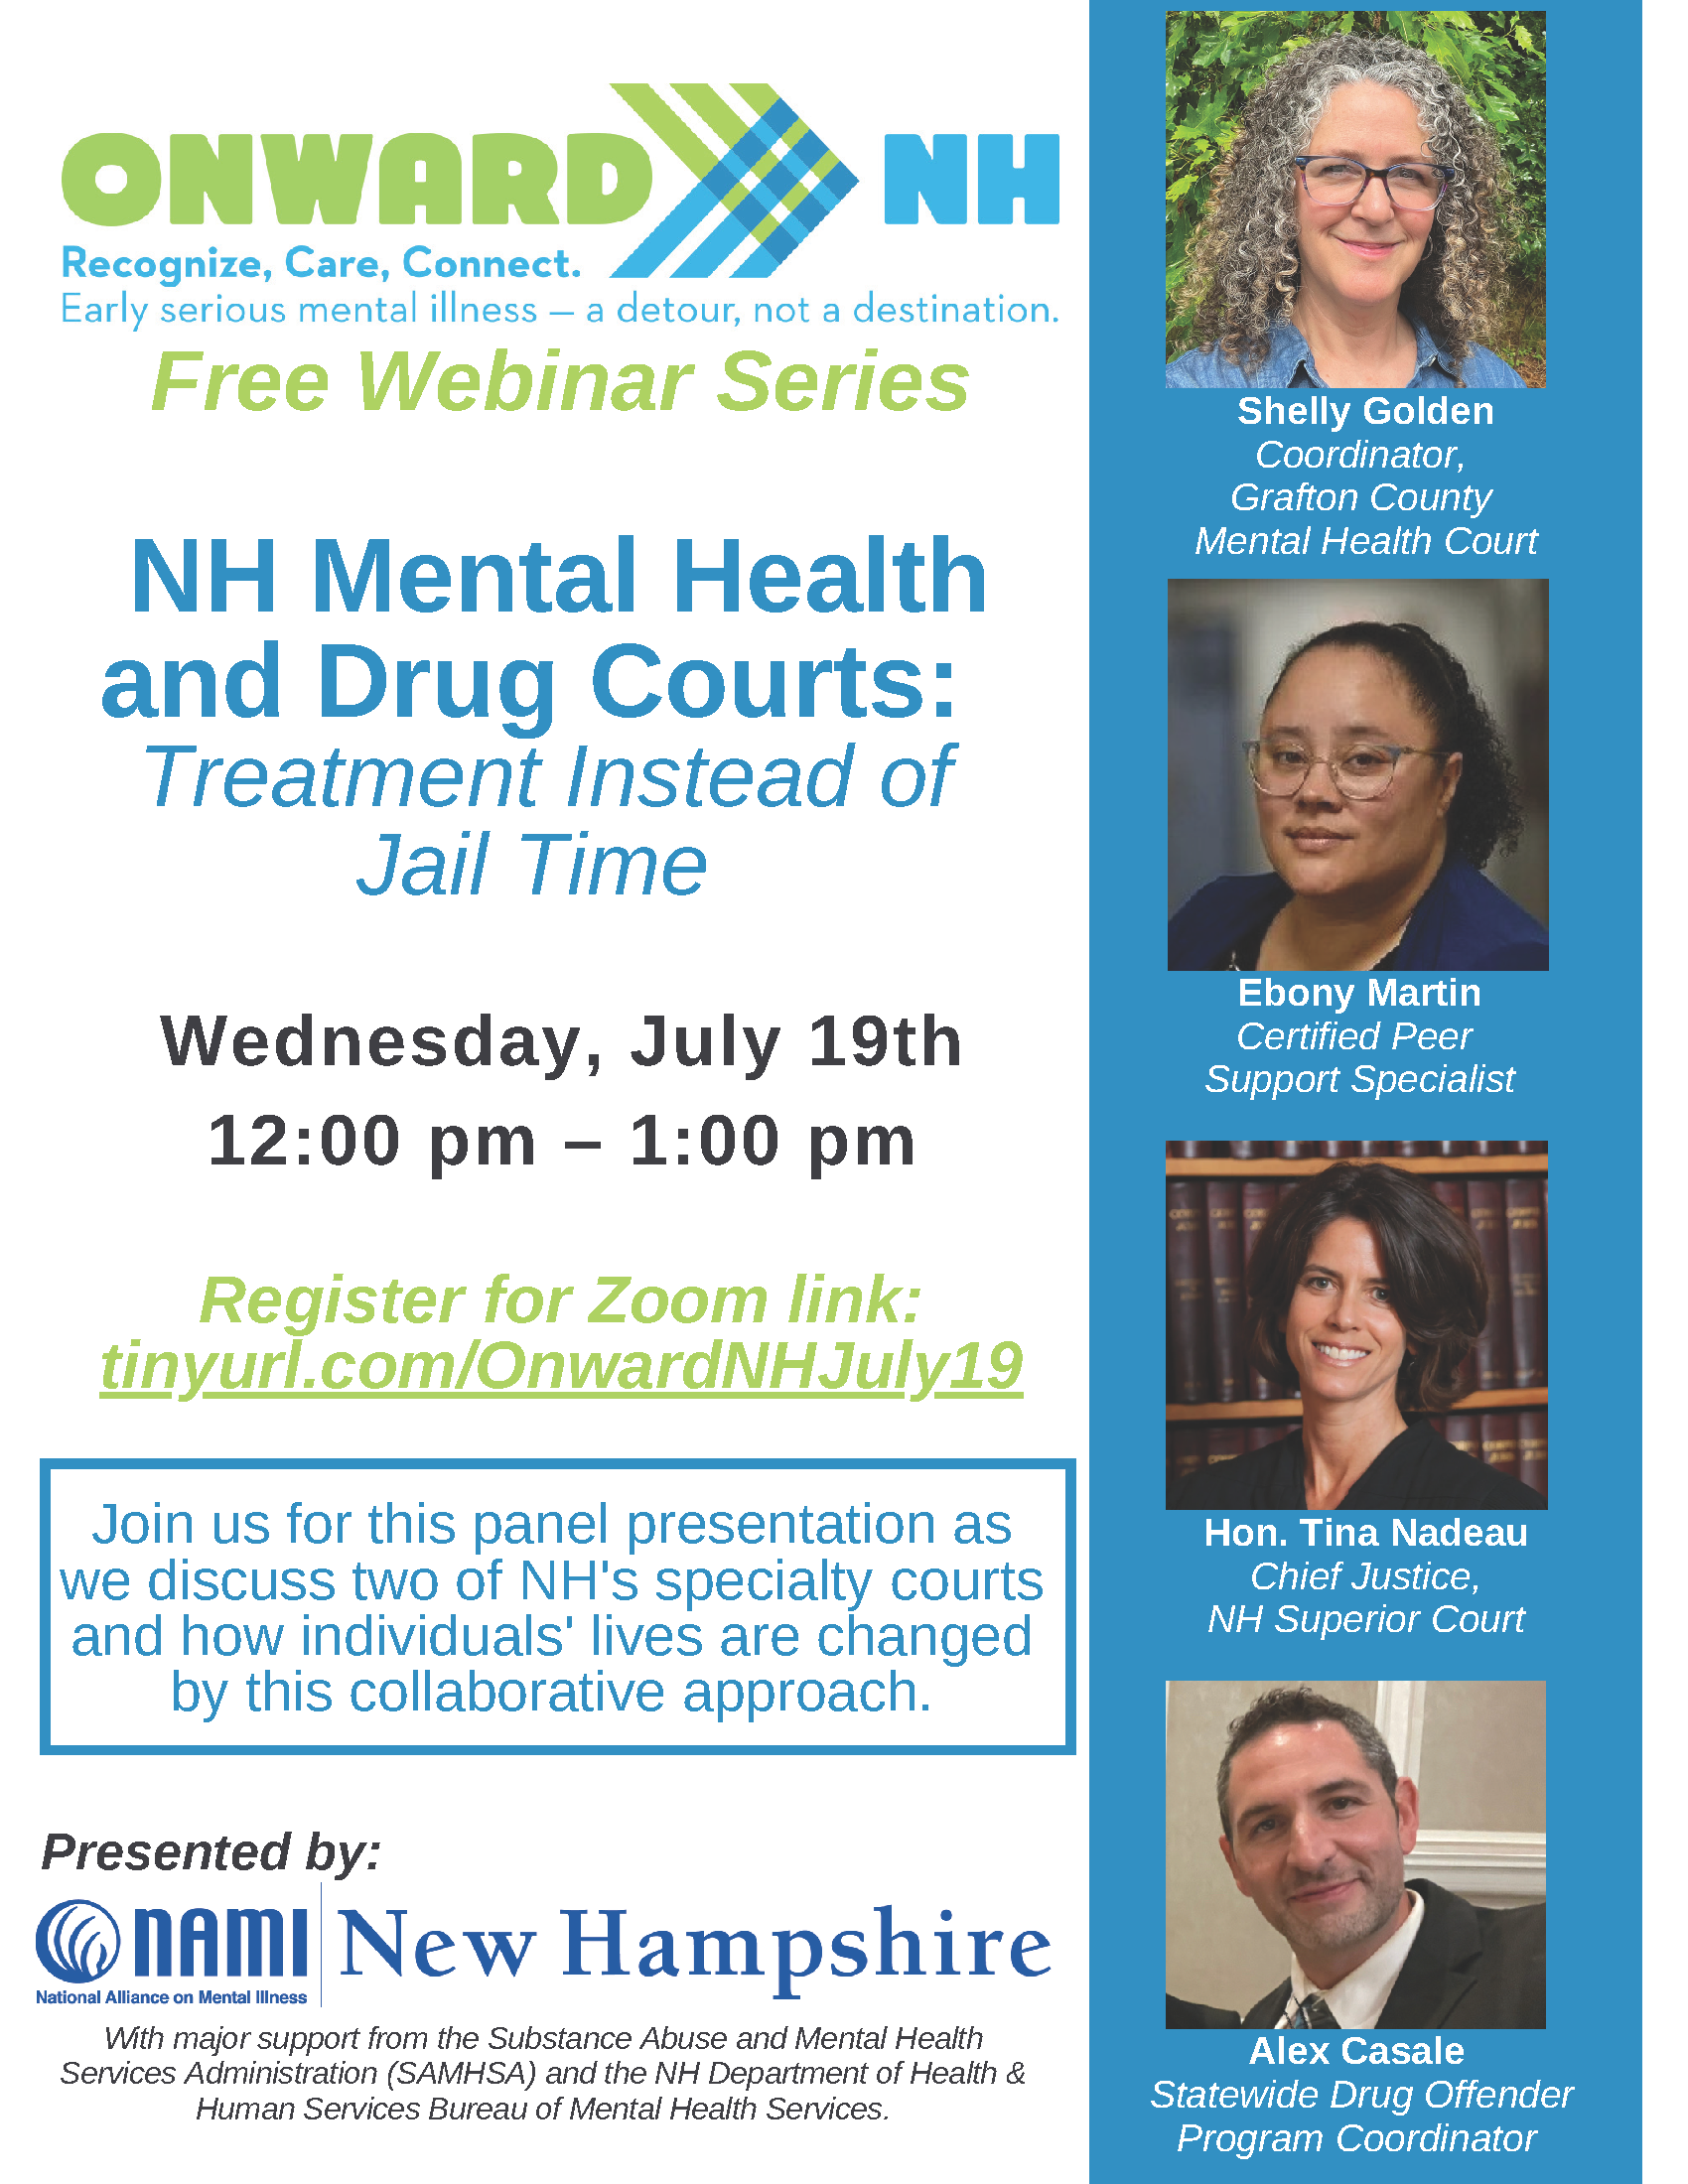 Onward NH Free Webinar Series - NH Mental Health and Drug Courts: Treatment Instead of Jail Time